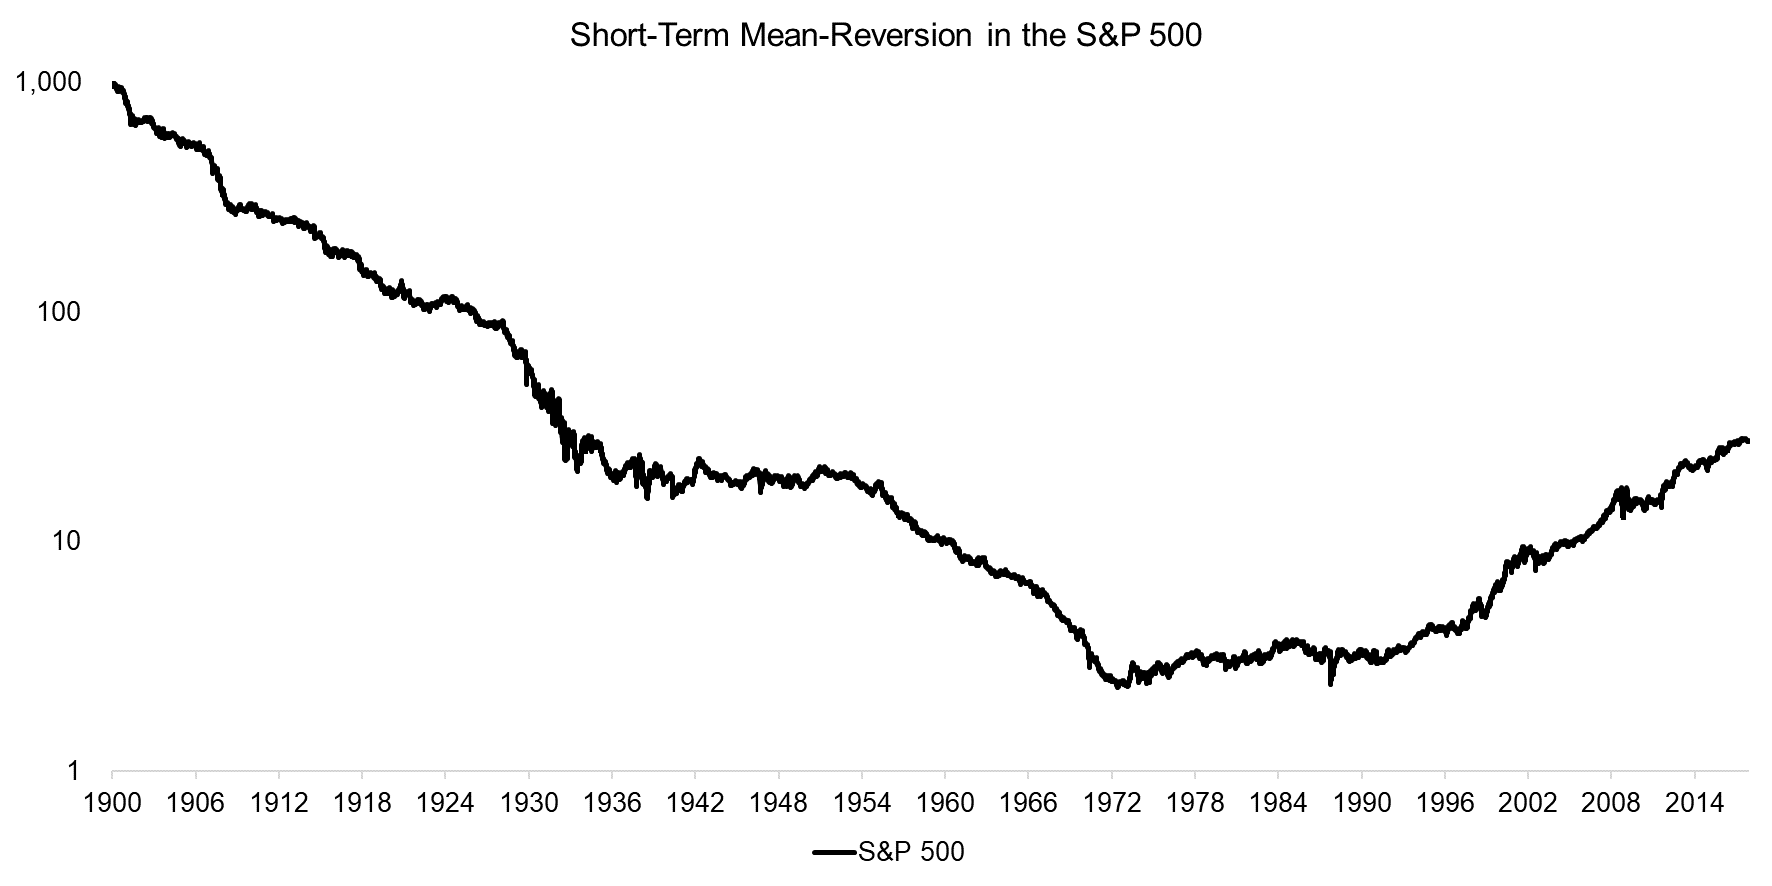 Short-Term Mean-Reversion in the S&P 500